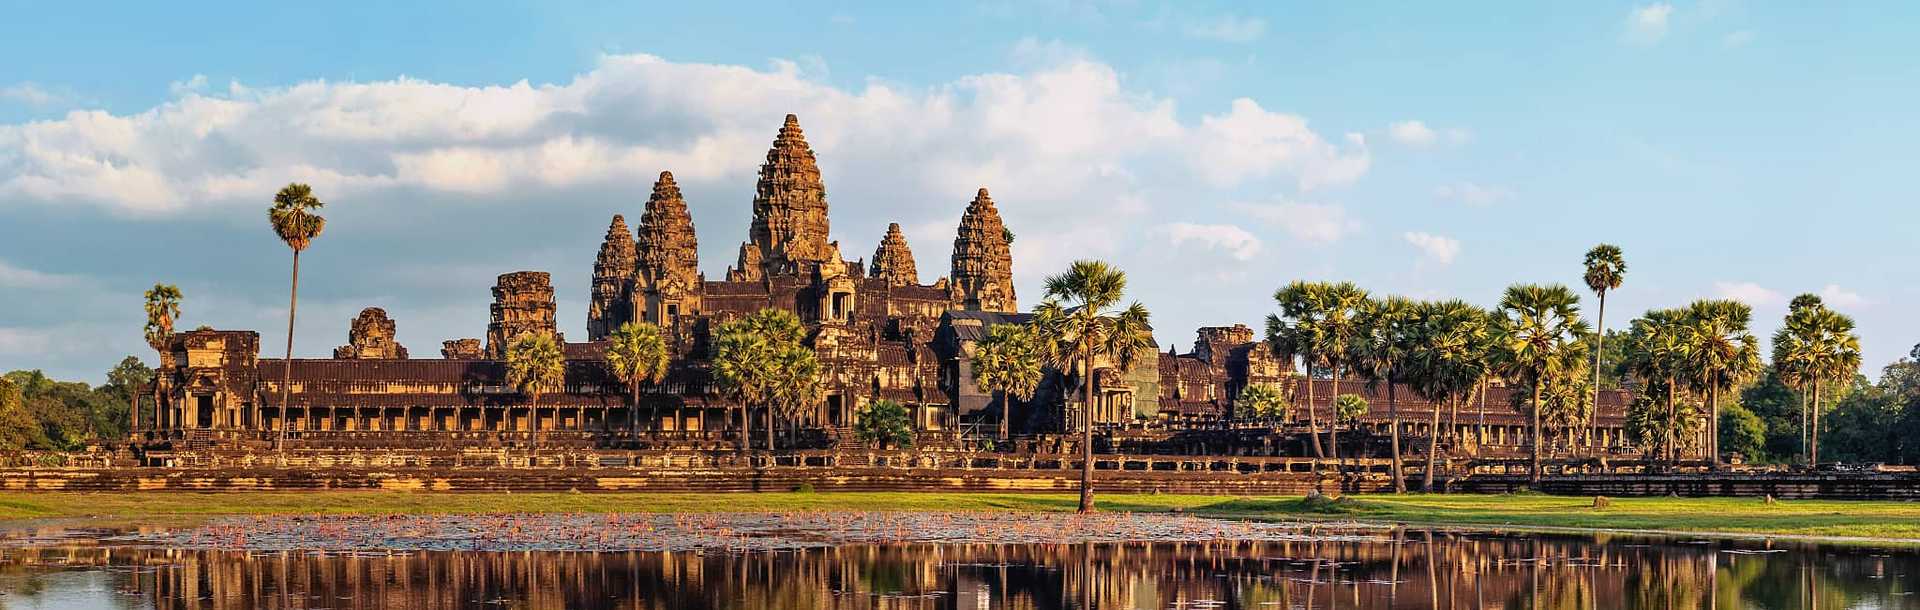 Angkor Wat temple at sunset in Siem Reap, Cambodia.